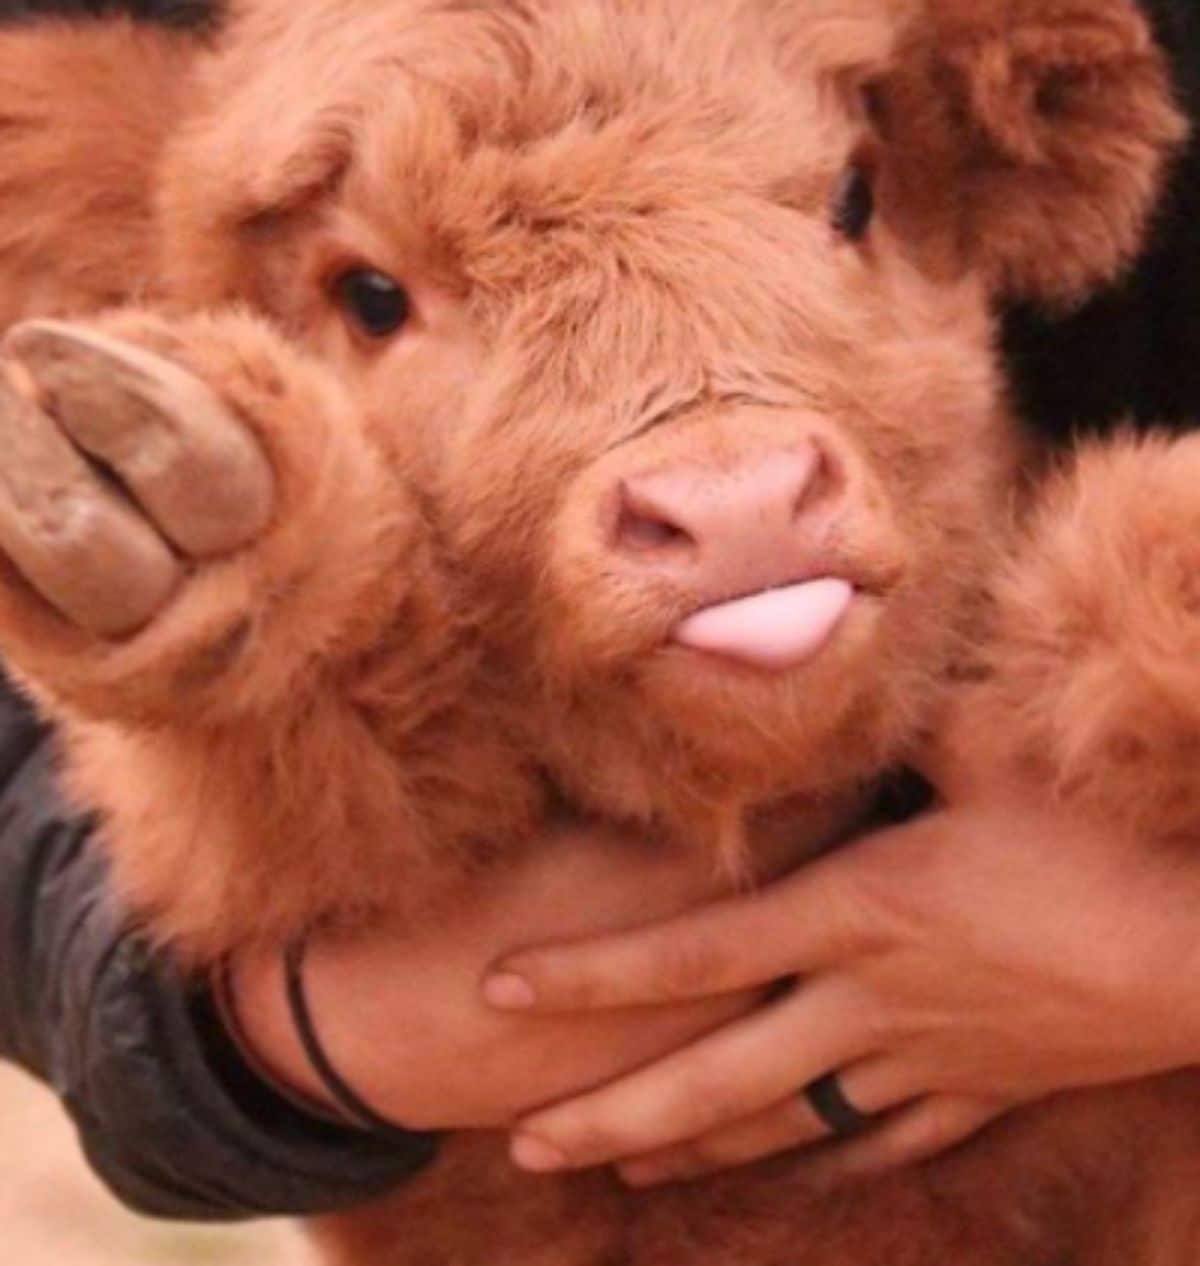 brown calf being held by someone with the tongue hanging out a little bit